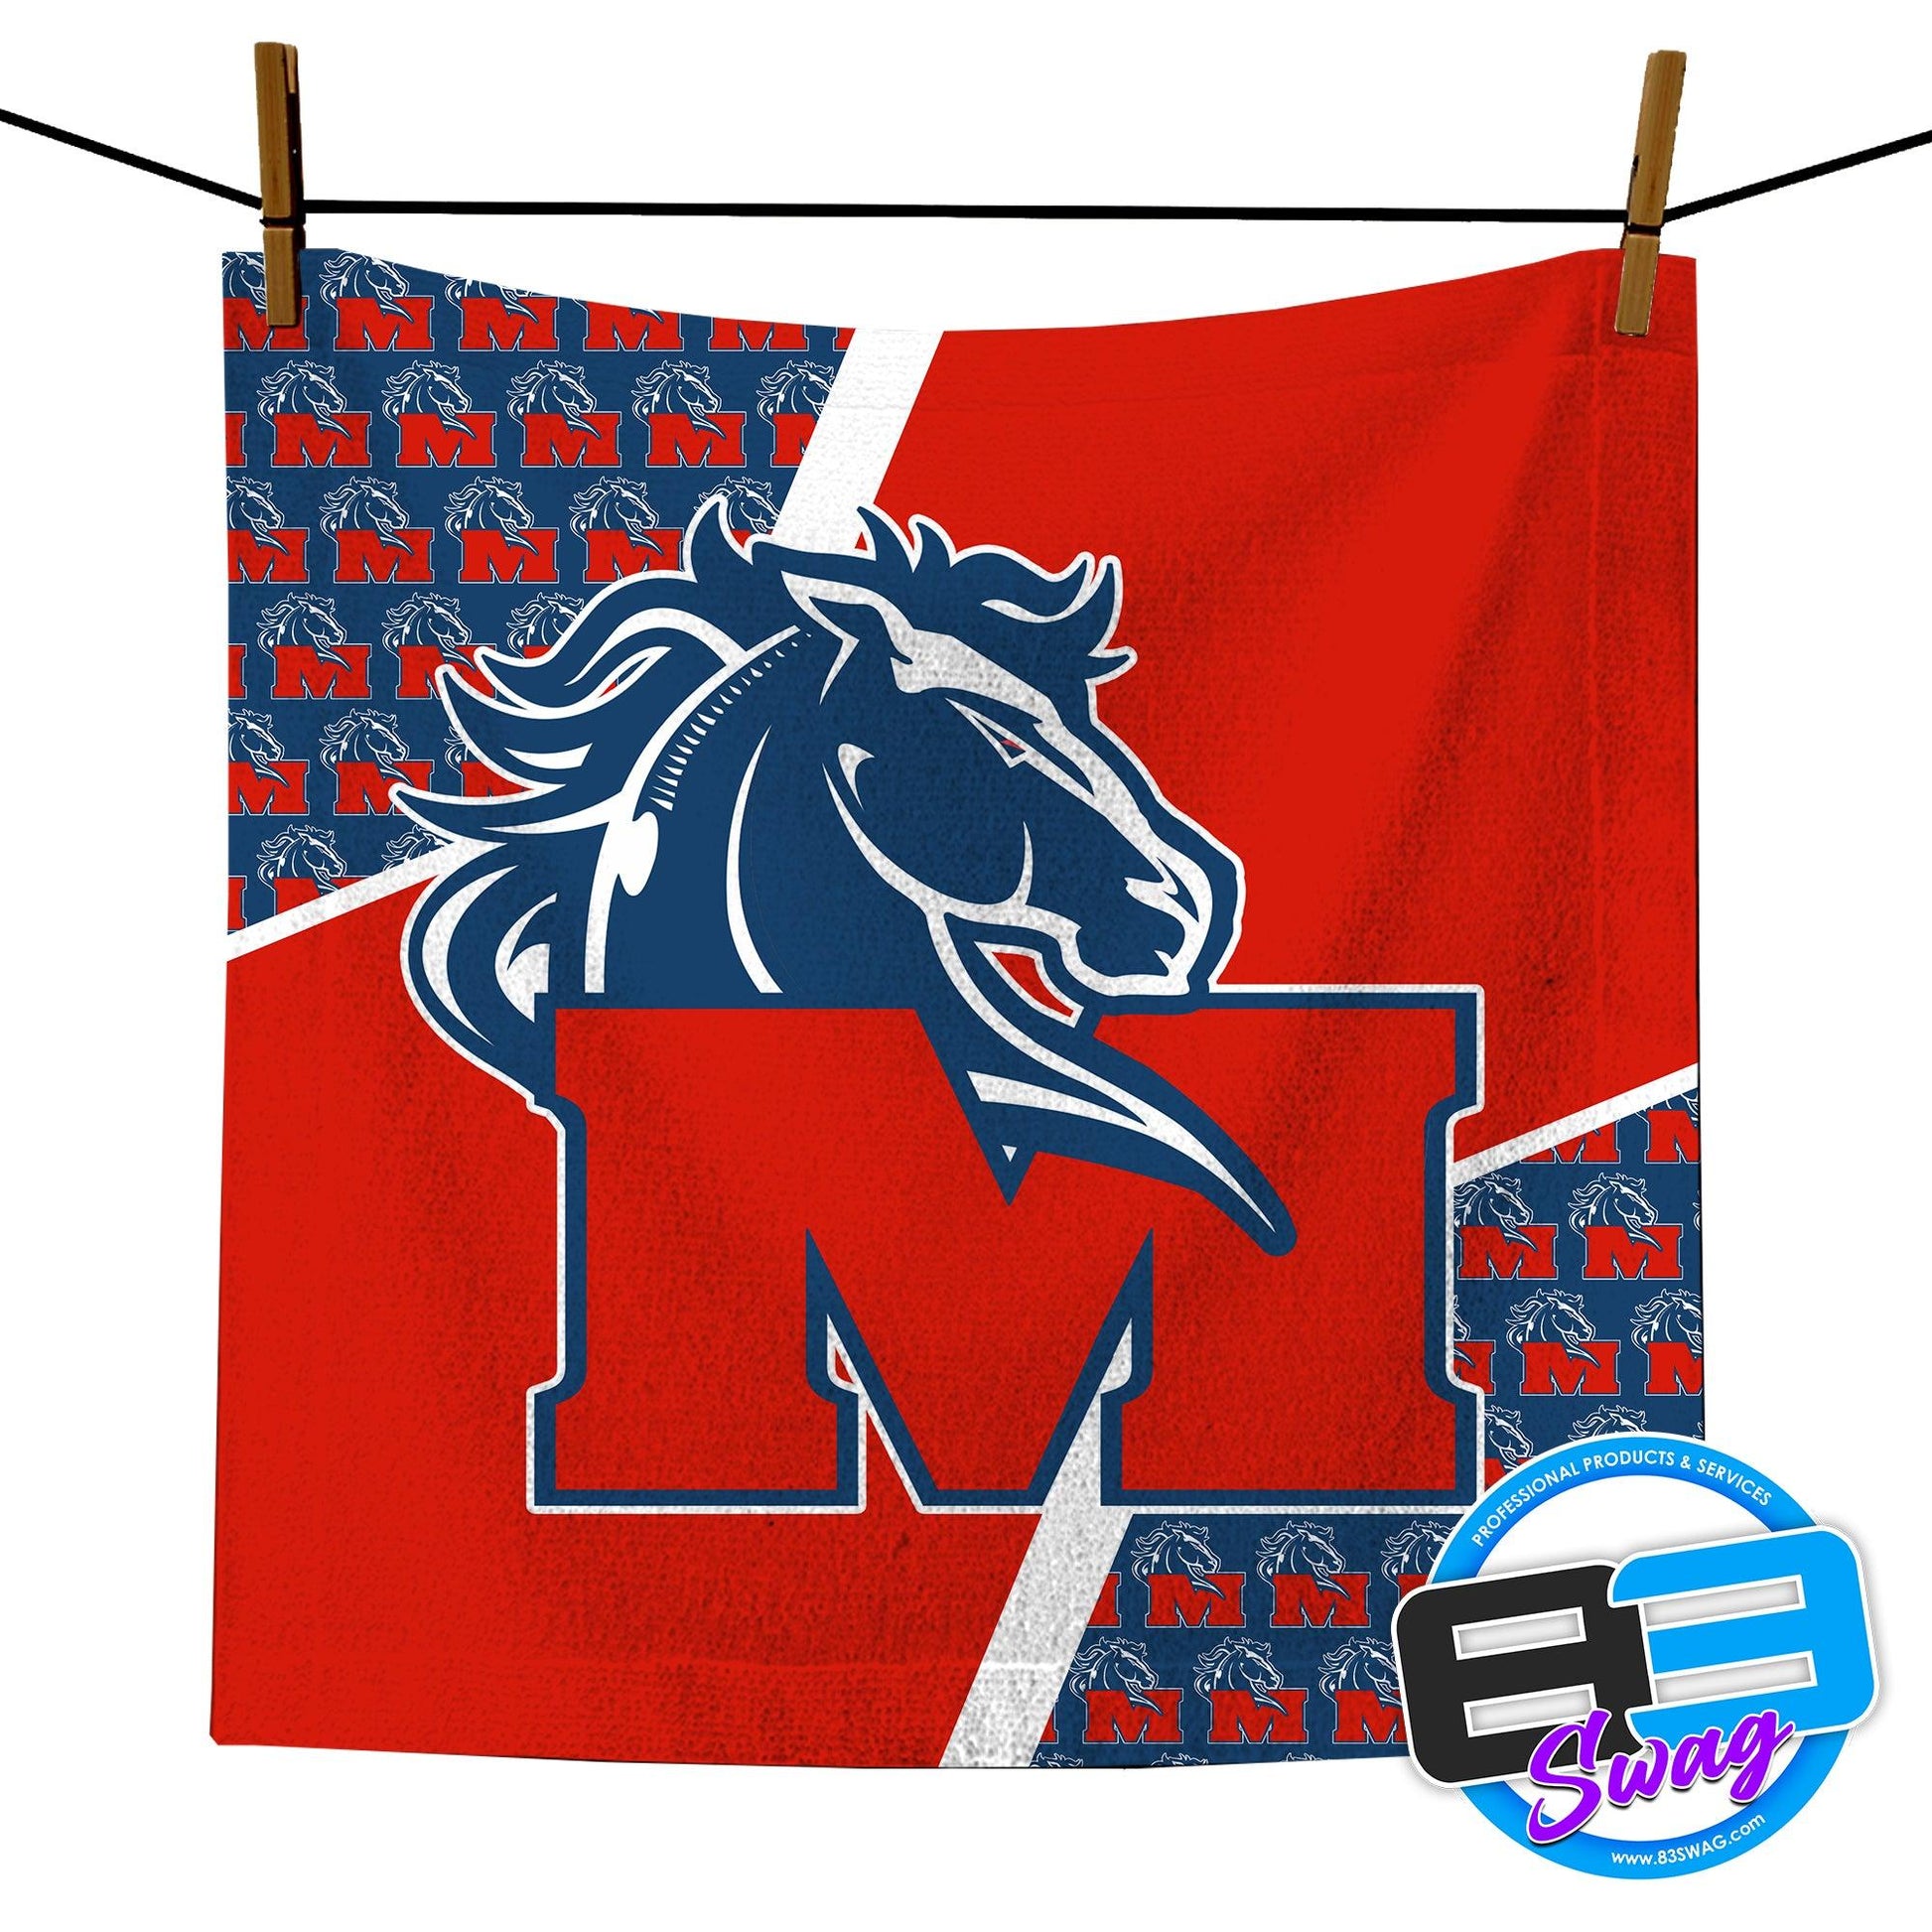 14"x14" Rally Towel - Indiana Mustangs - 83Swag